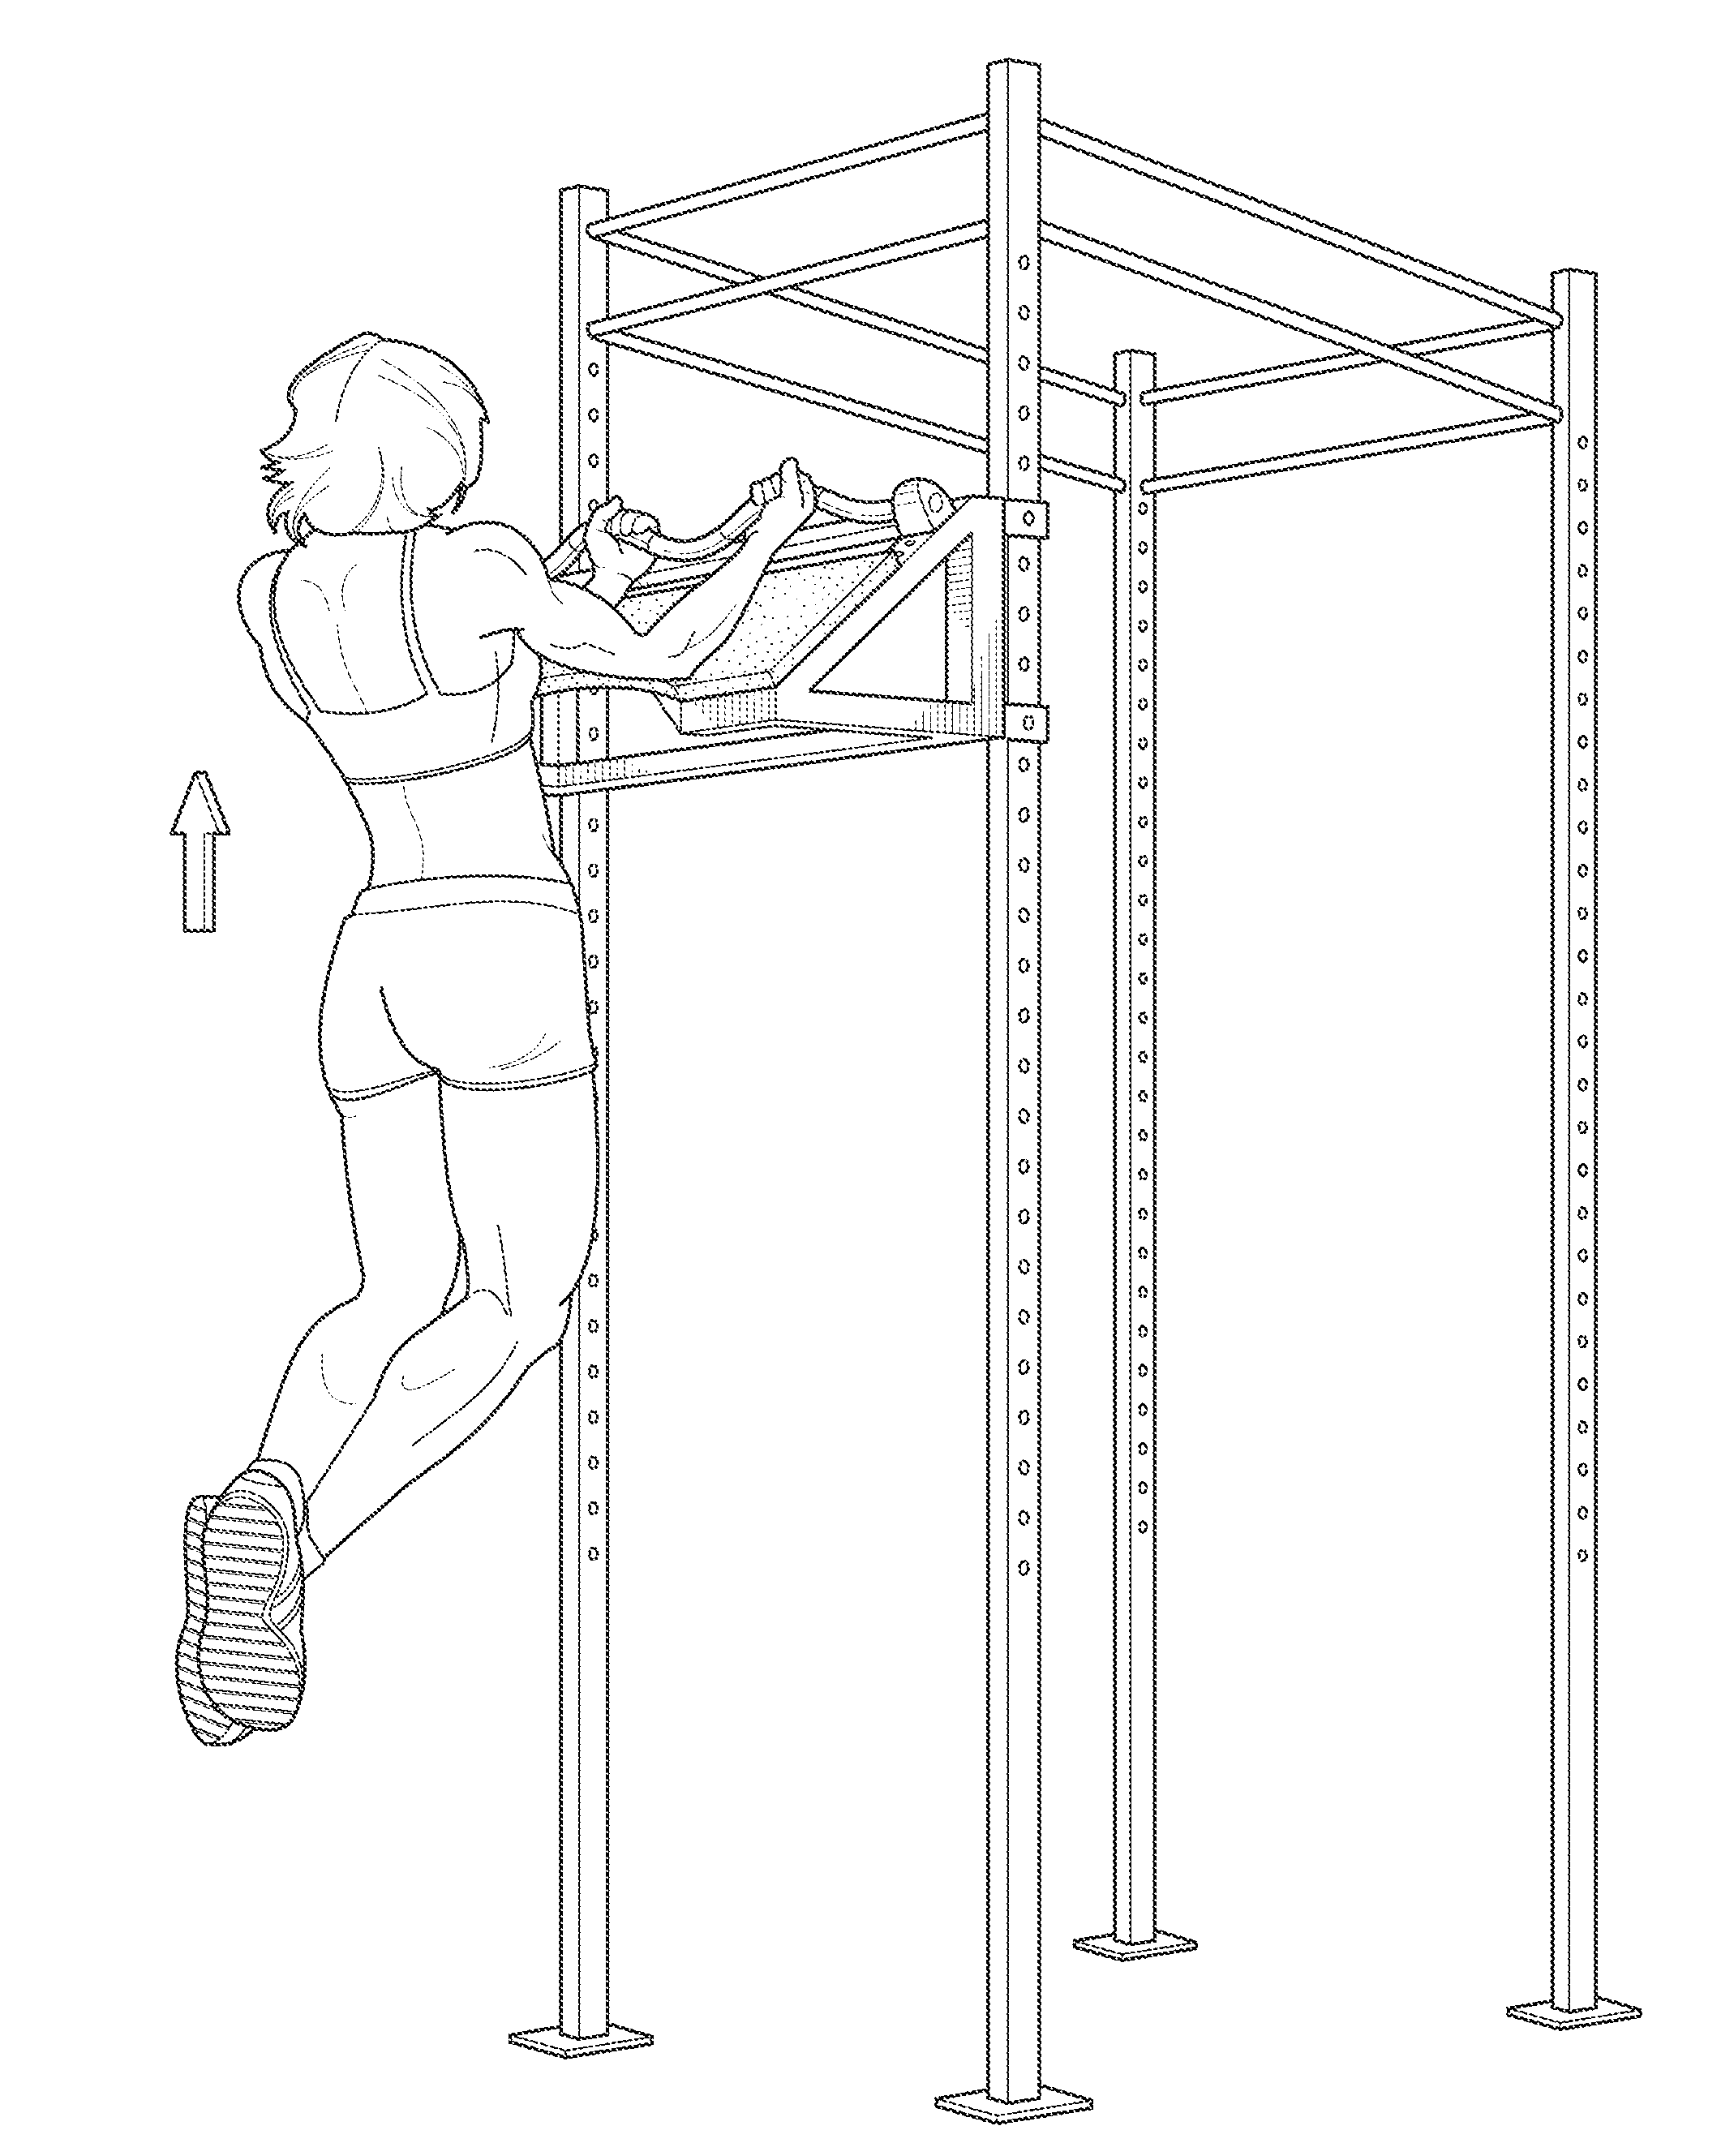 Isolated Upper-Body Exercise Device